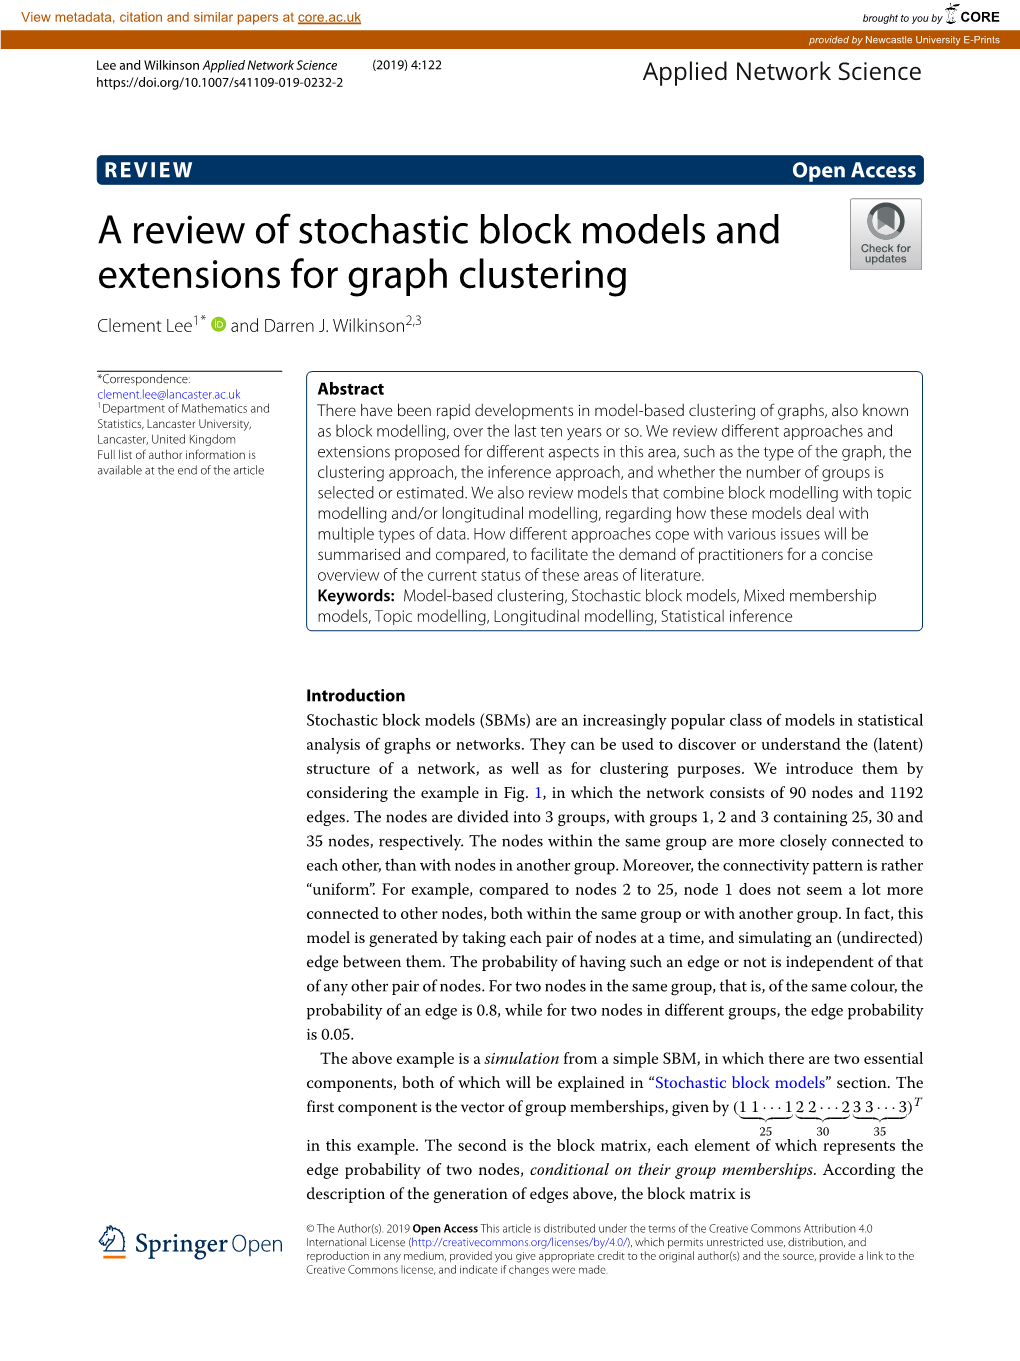 A Review of Stochastic Block Models and Extensions for Graph Clustering